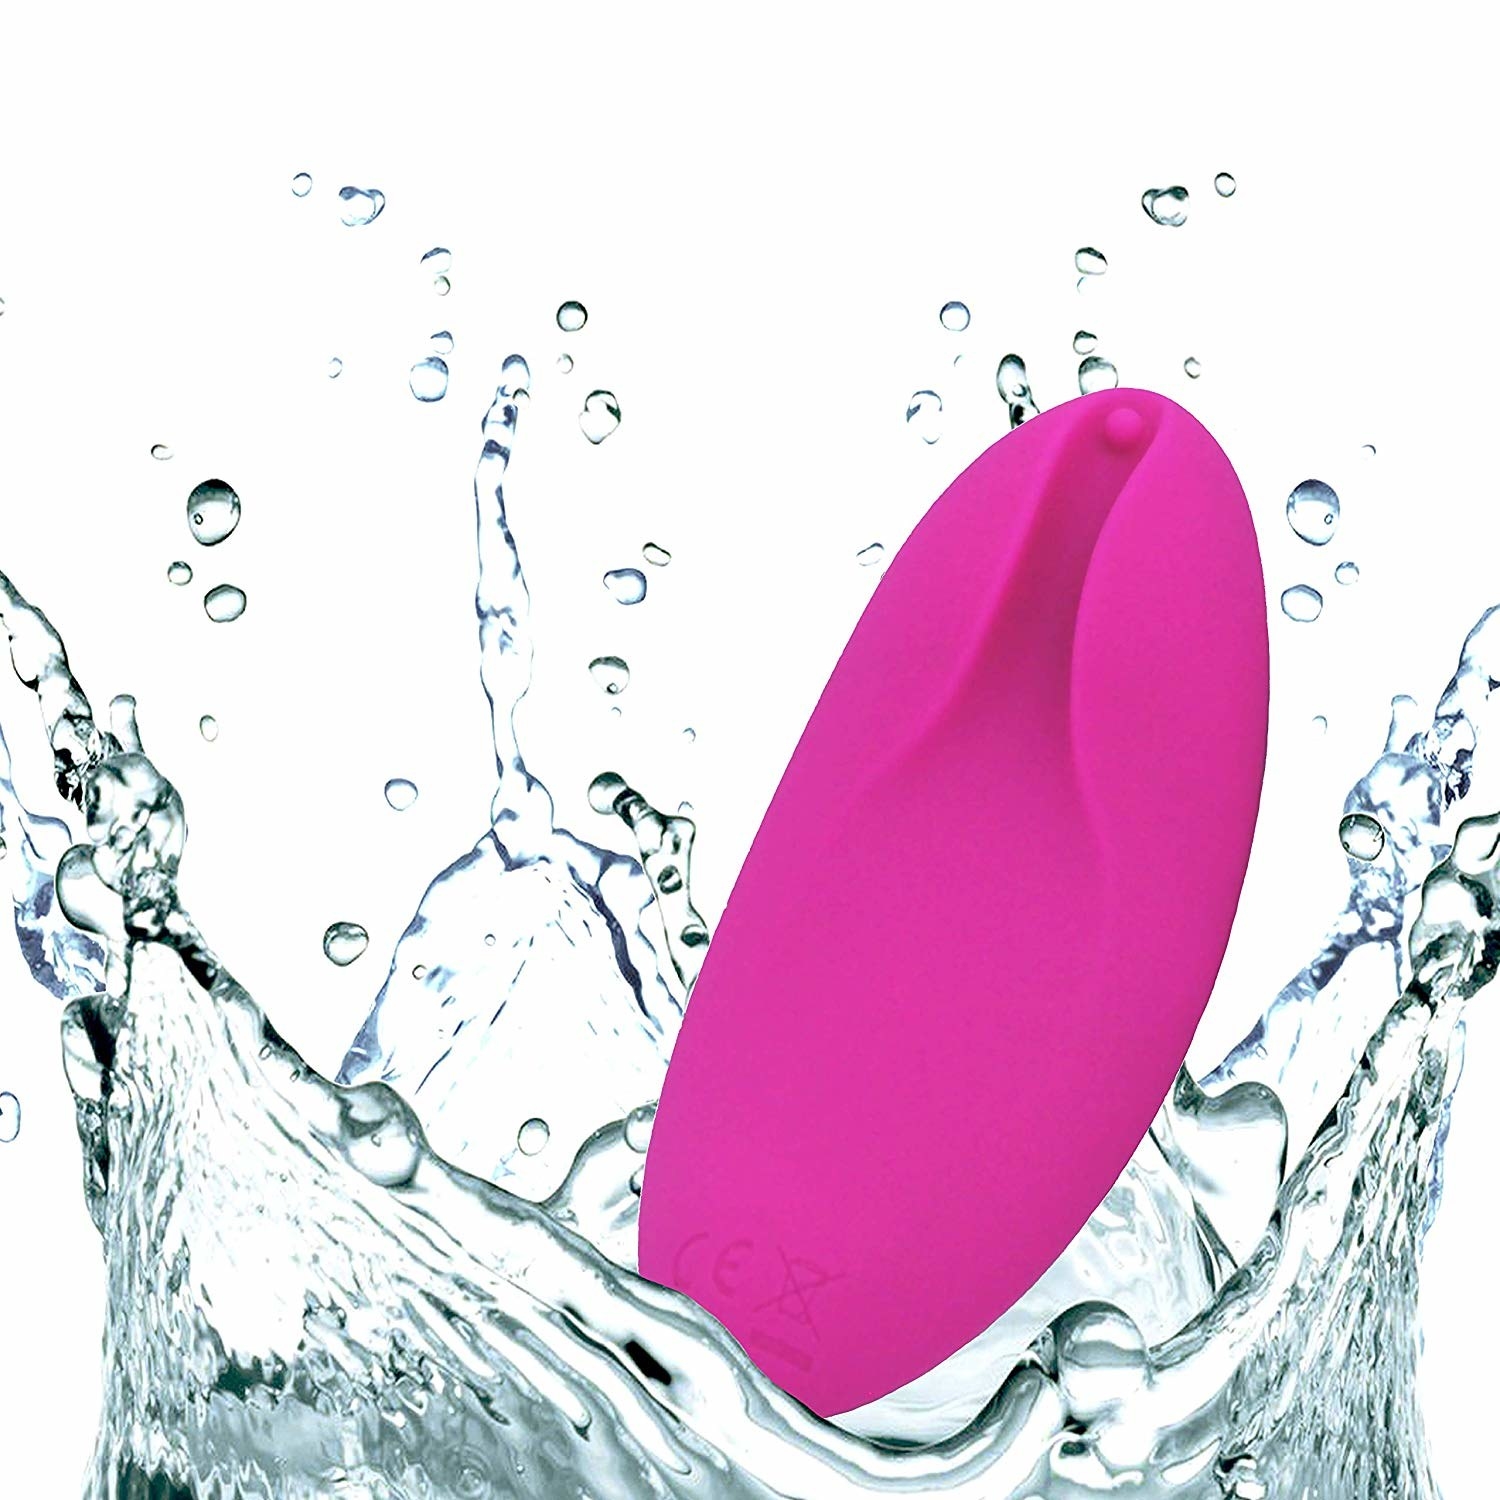 The sex toy in pink 